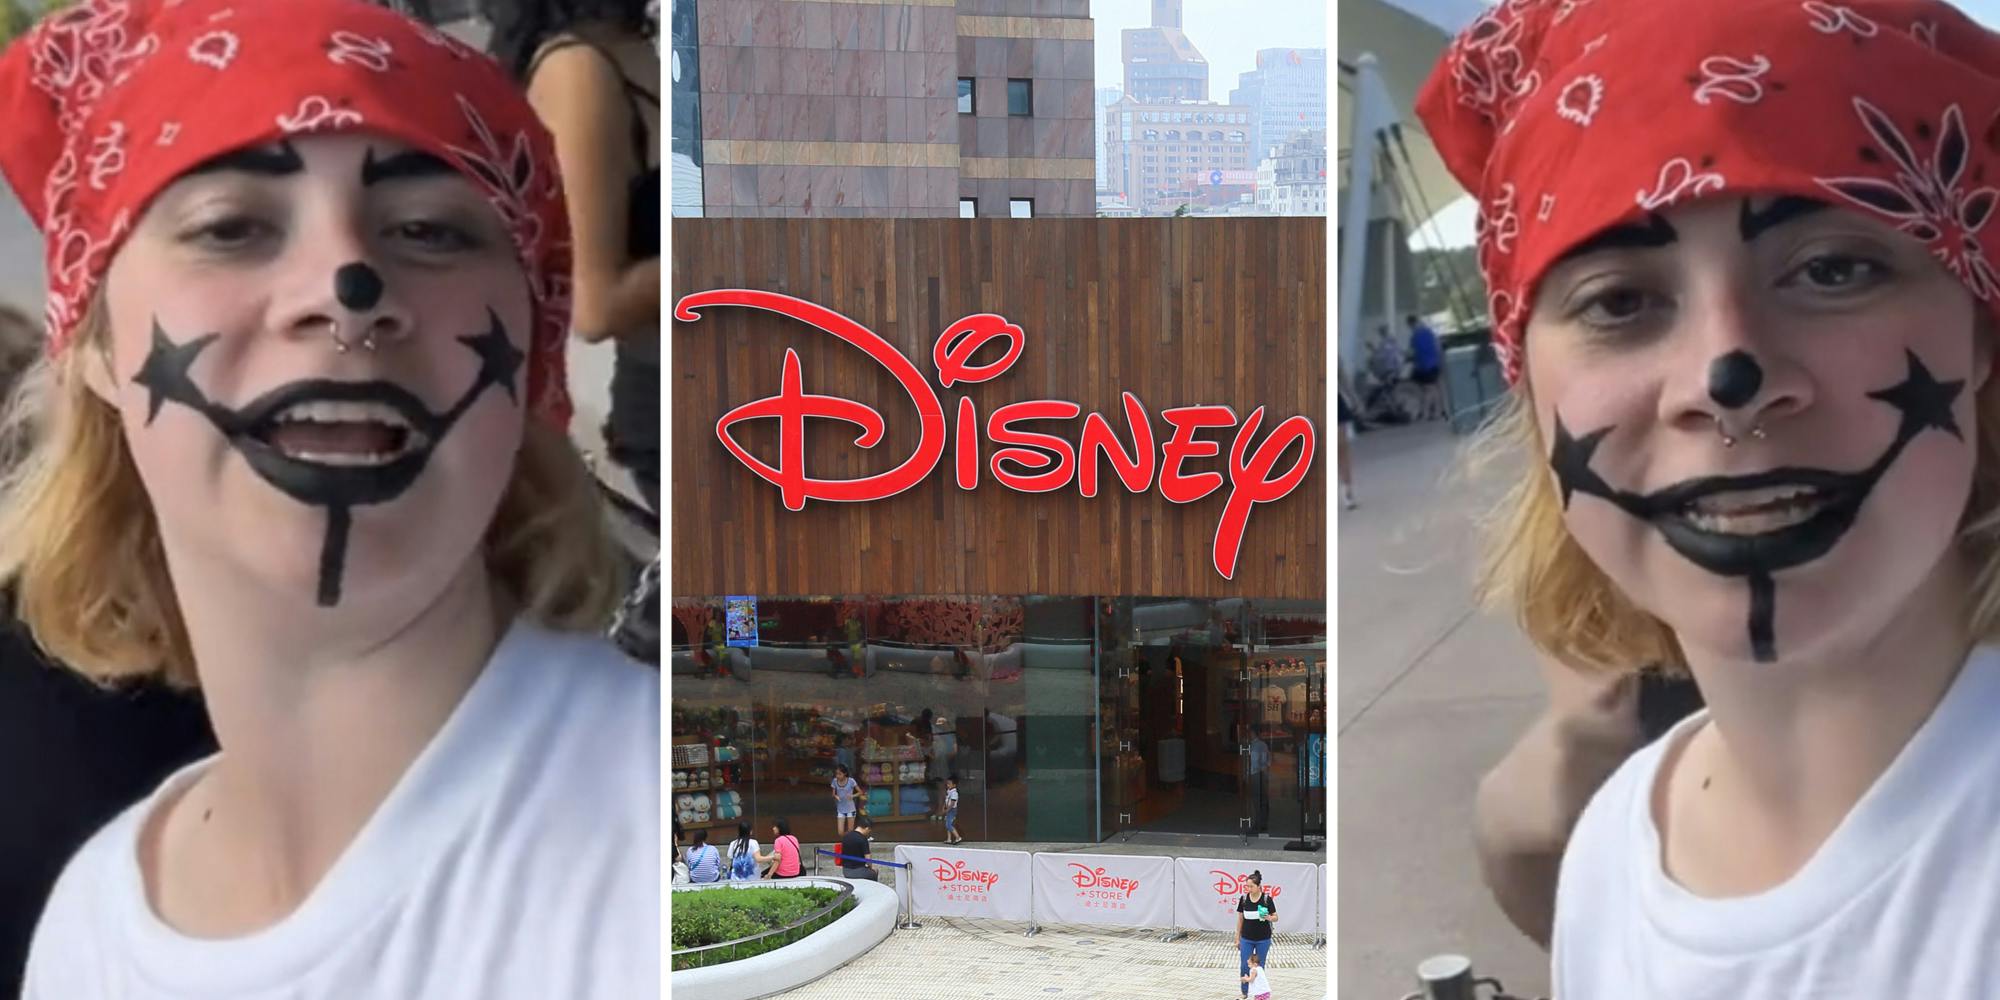 ‘They’re so inconsistent with their rules’: Guest says she was blocked from Disney Springs event because of her makeup. She paid to have it done at Disney